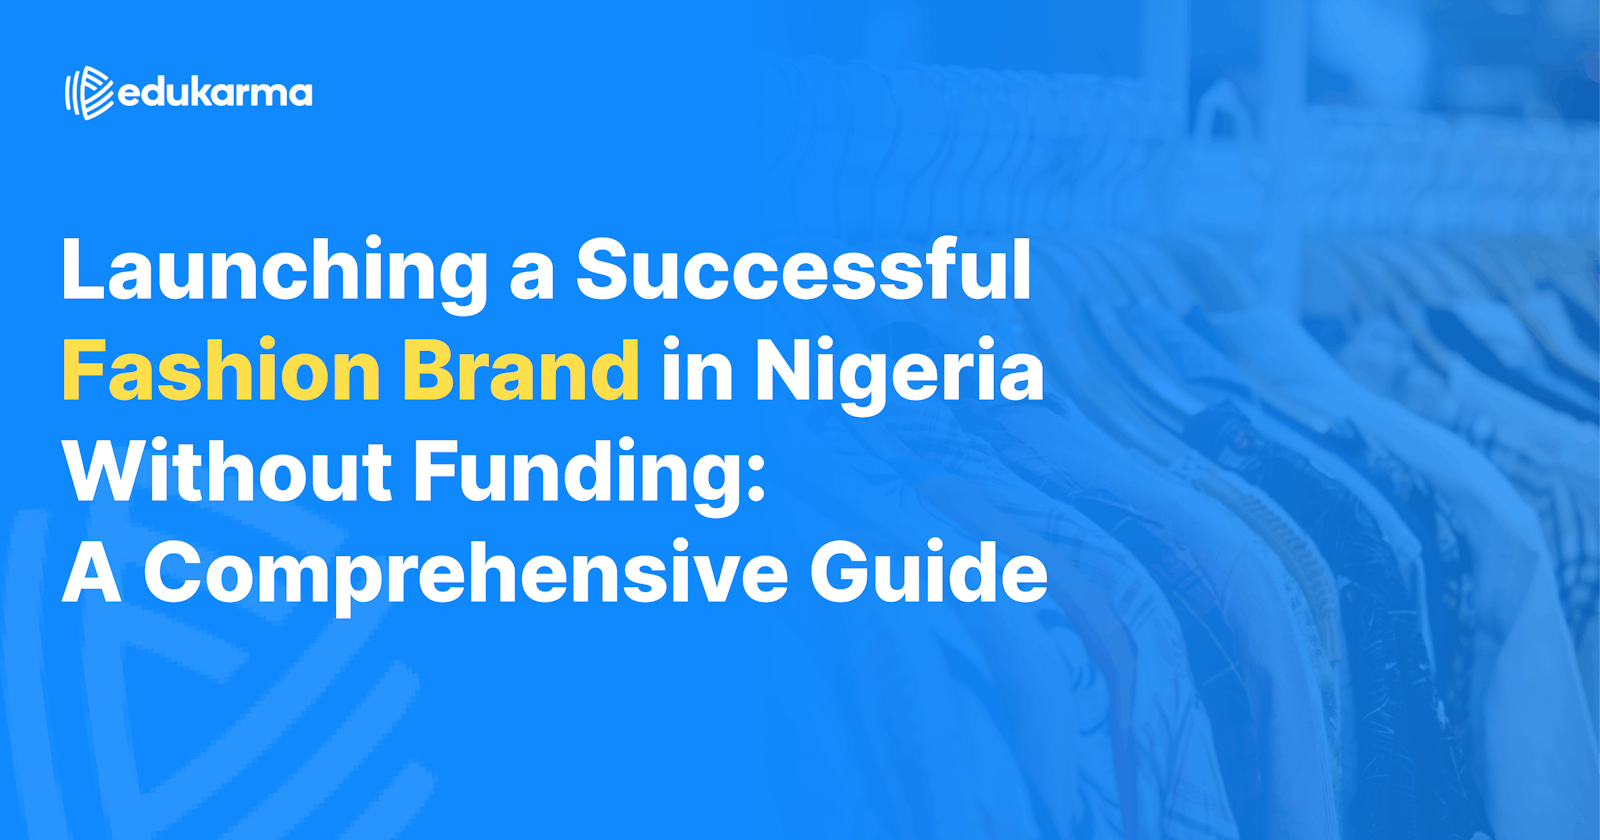 Launching a Successful Fashion Brand in Nigeria Without Funding: A Comprehensive Guide